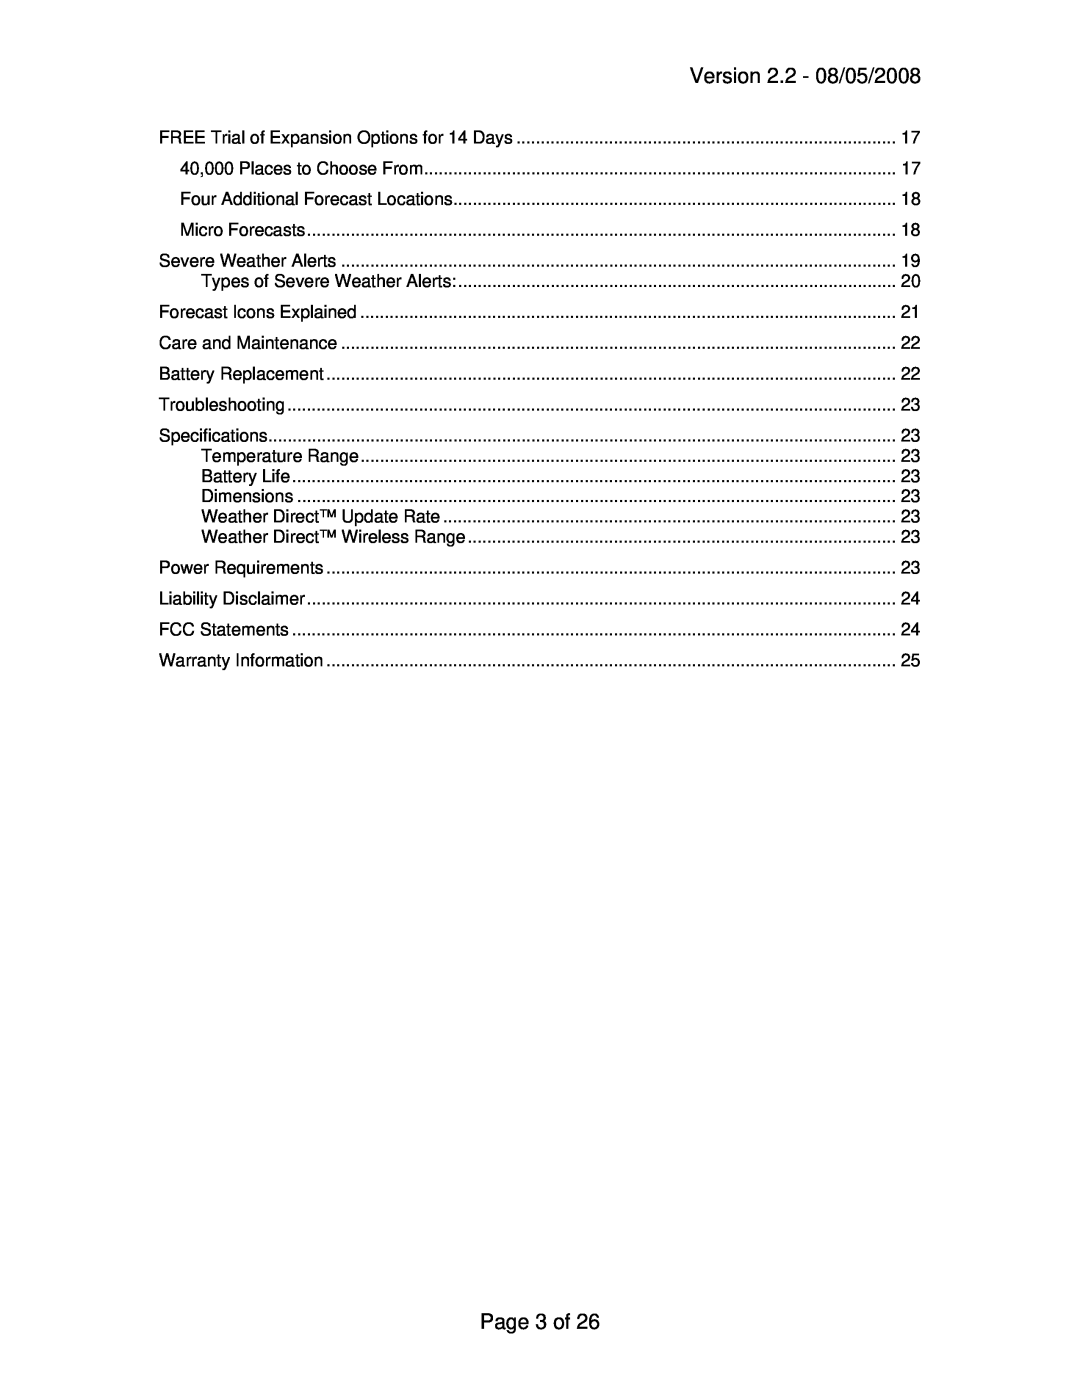 La Crosse Technology WD-3105 owner manual Version 2.2 - 08/05/2008, Page 3 of 